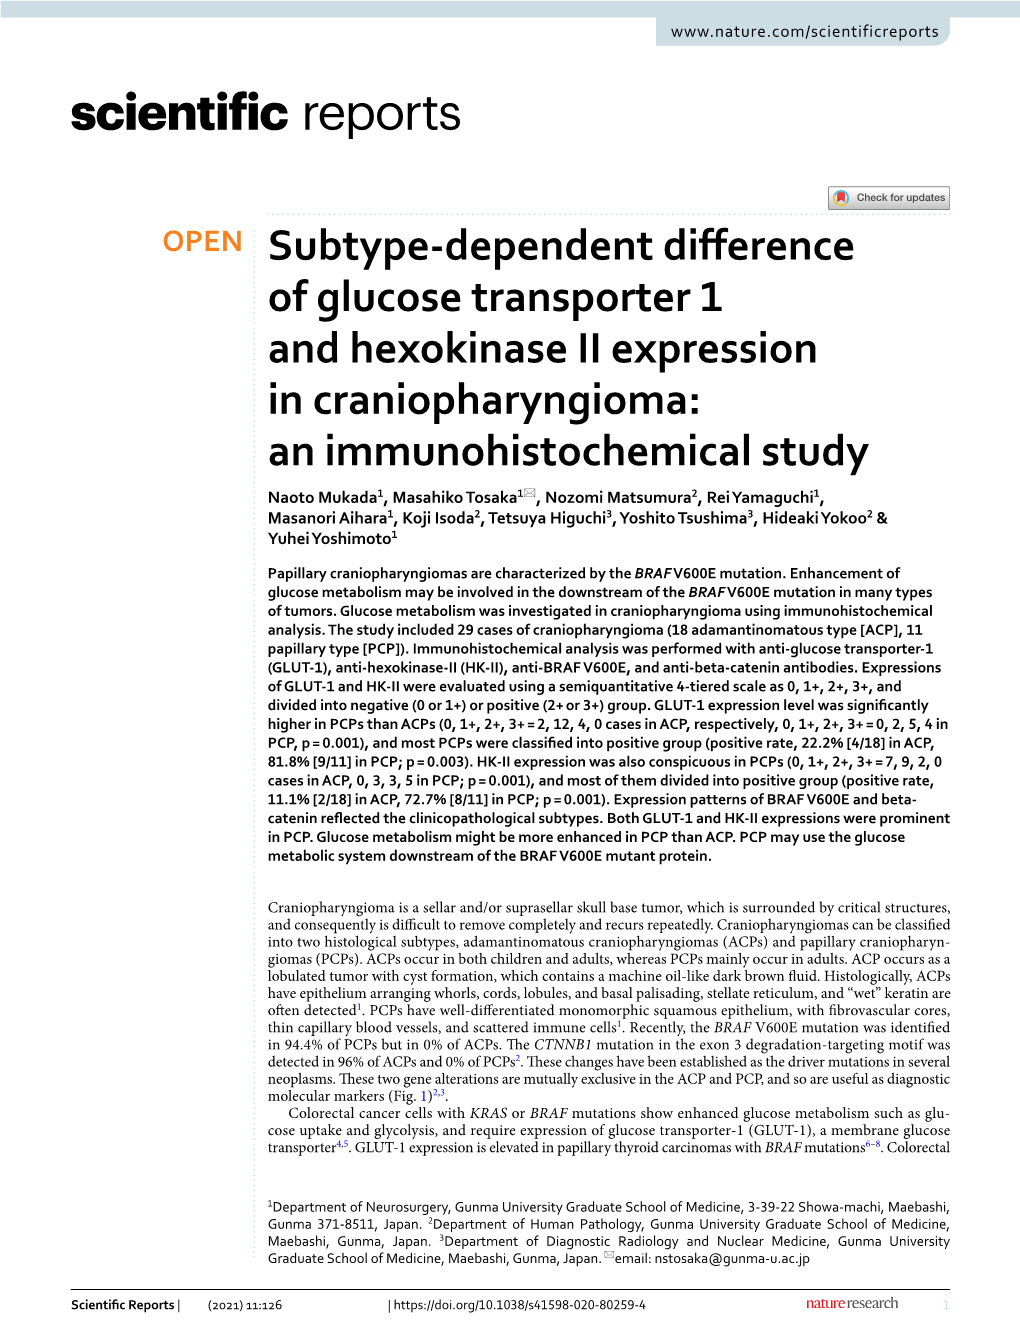 Subtype-Dependent Difference of Glucose Transporter 1 And